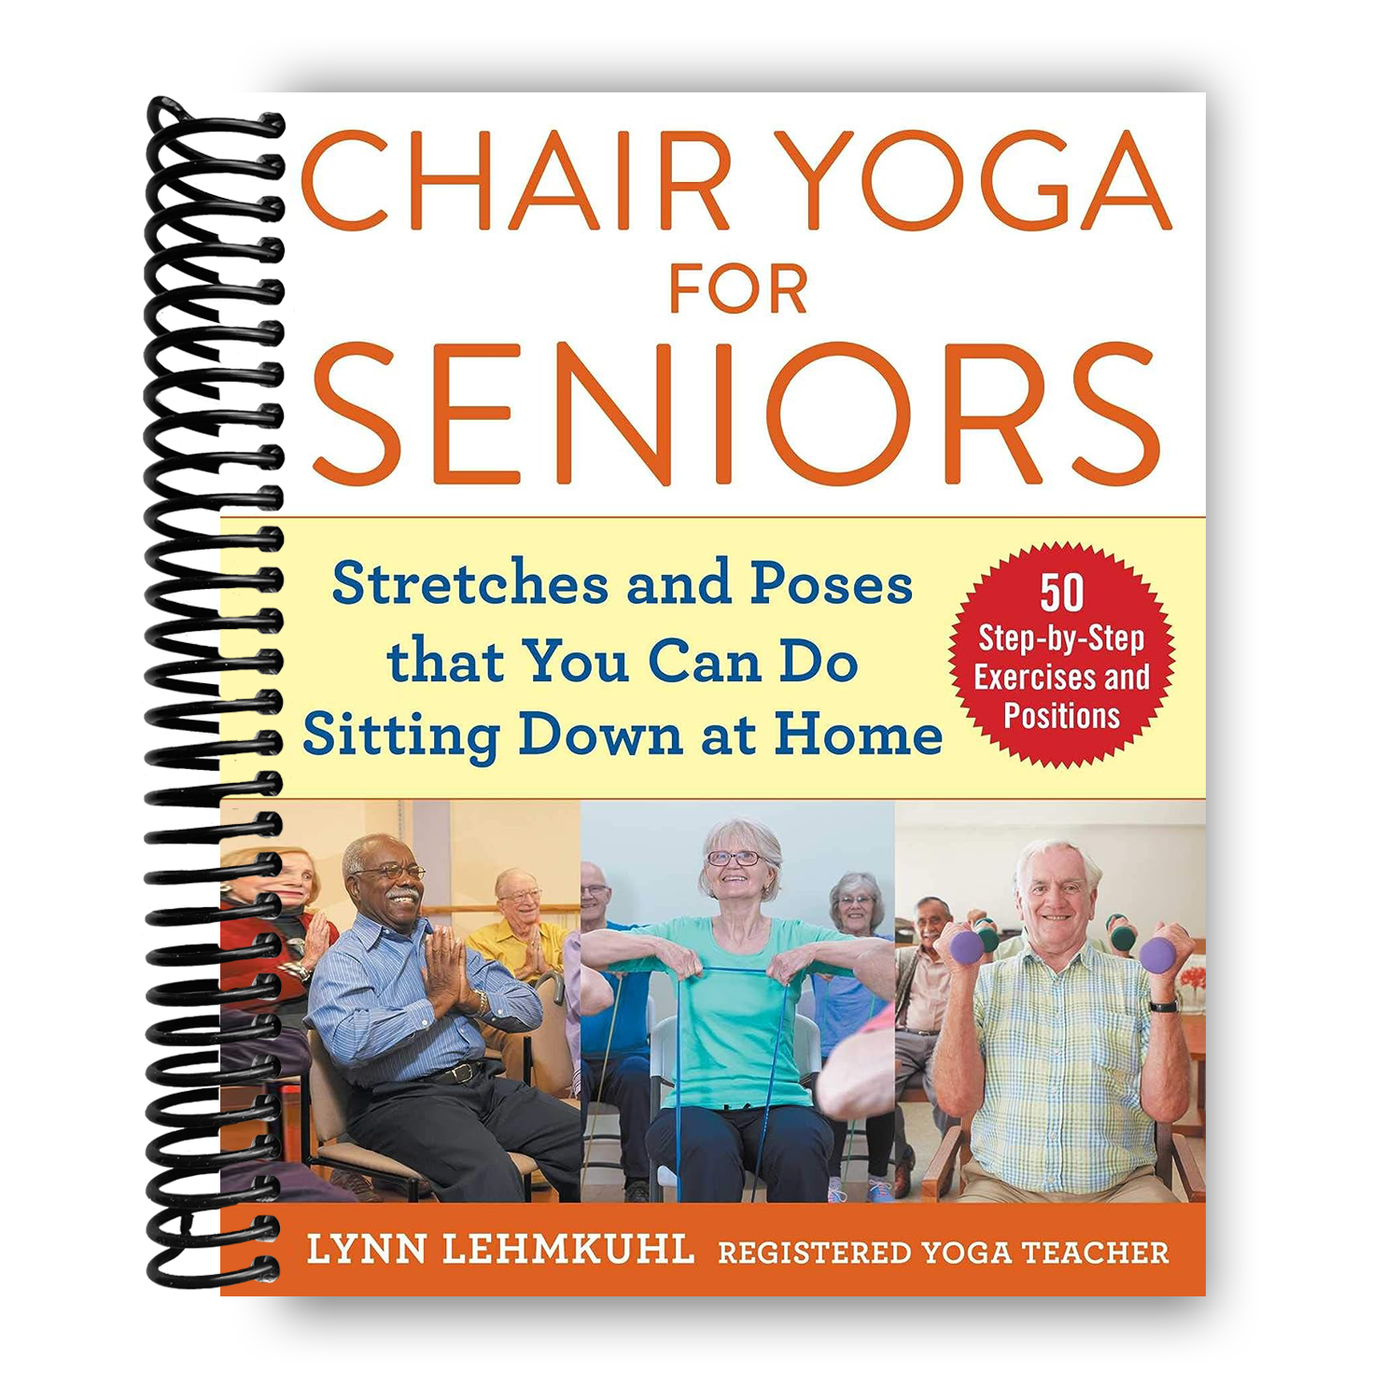 13 Benefits of Chair Yoga for Seniors